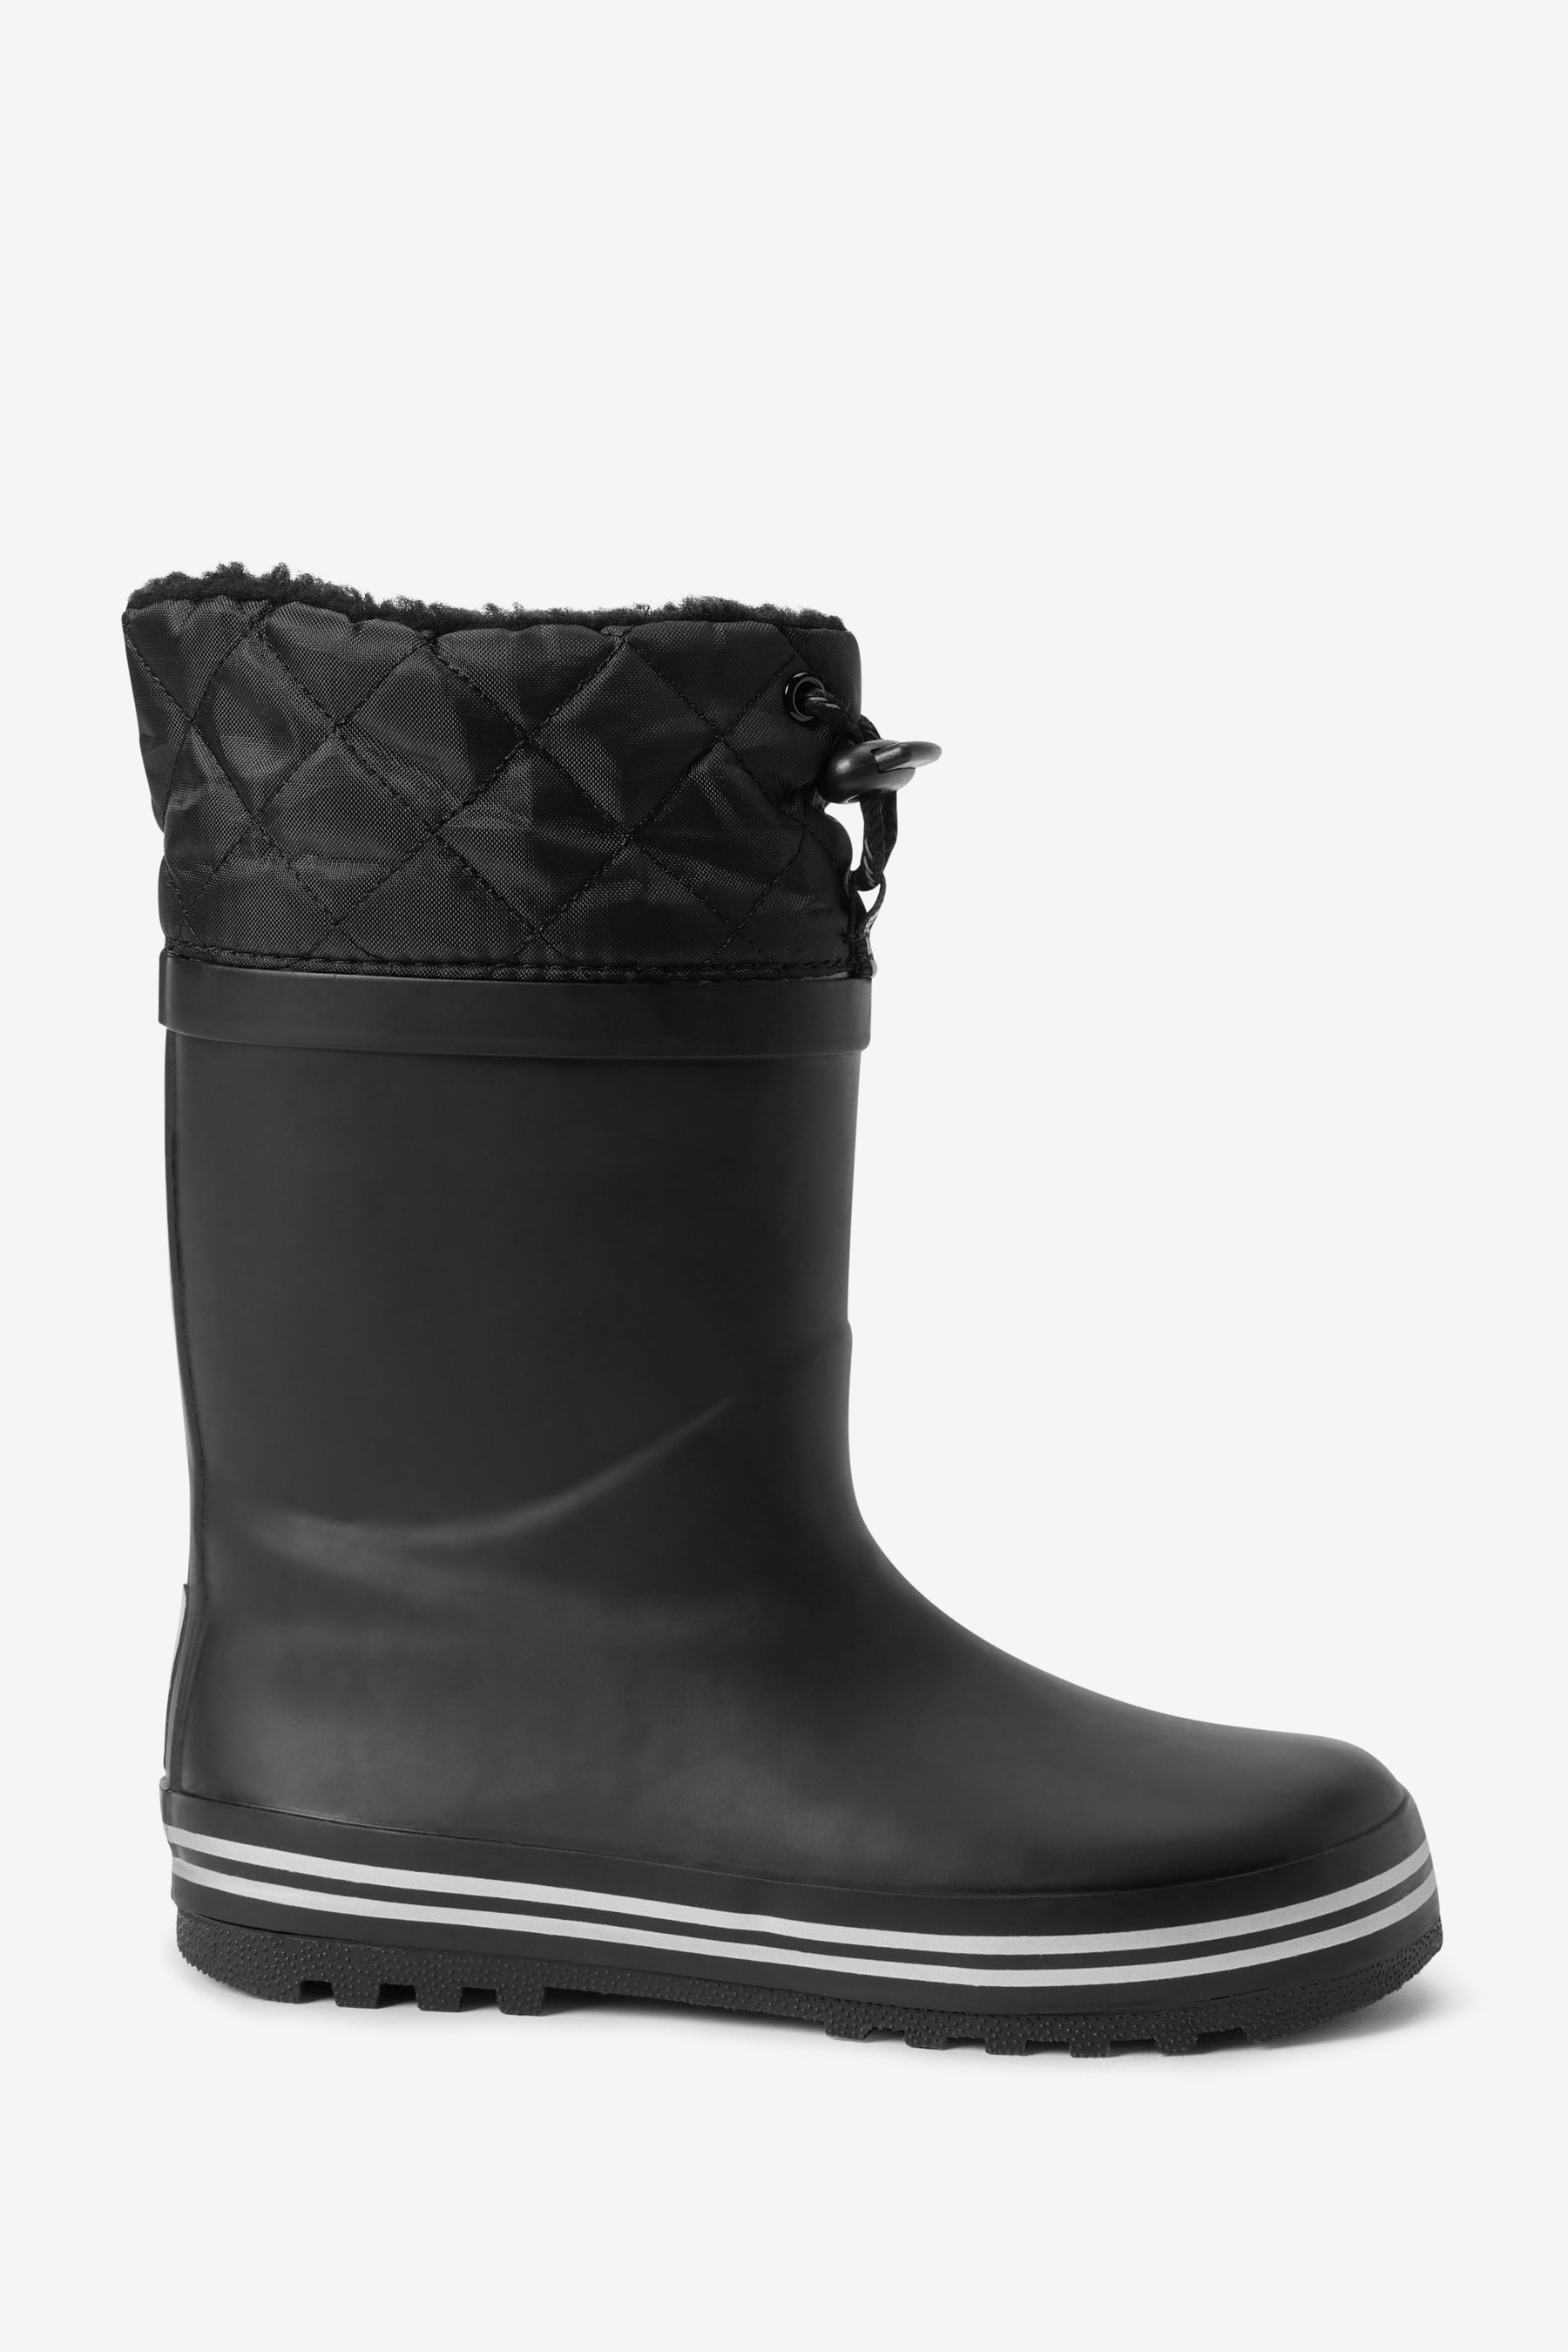 Buy Warm Lined Cuff Wellies from Next Ireland